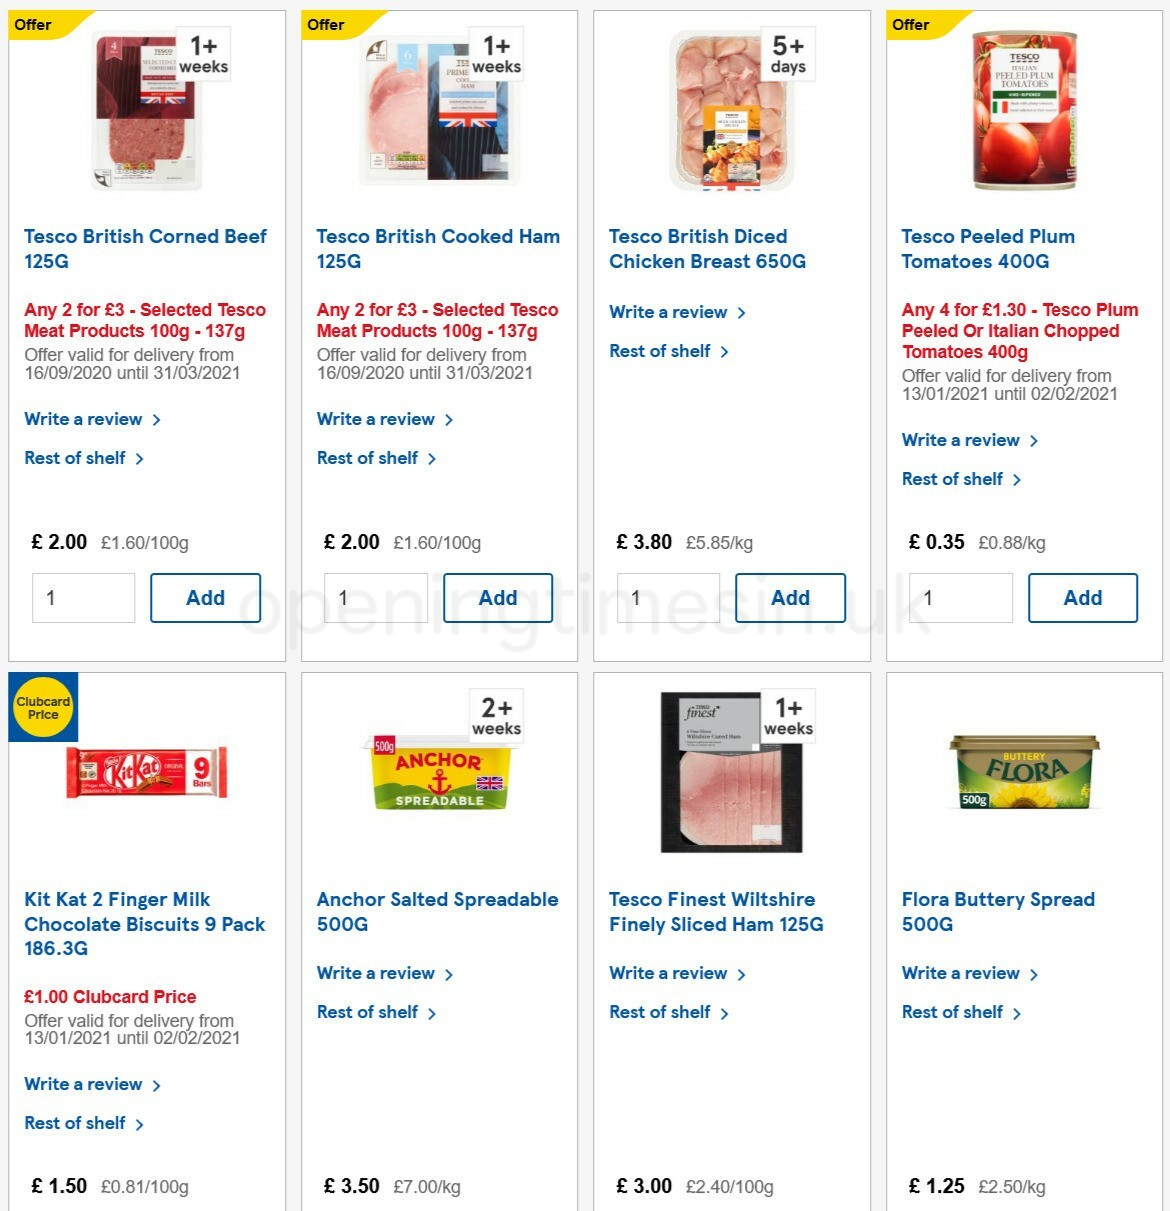 TESCO Offers from 27 January